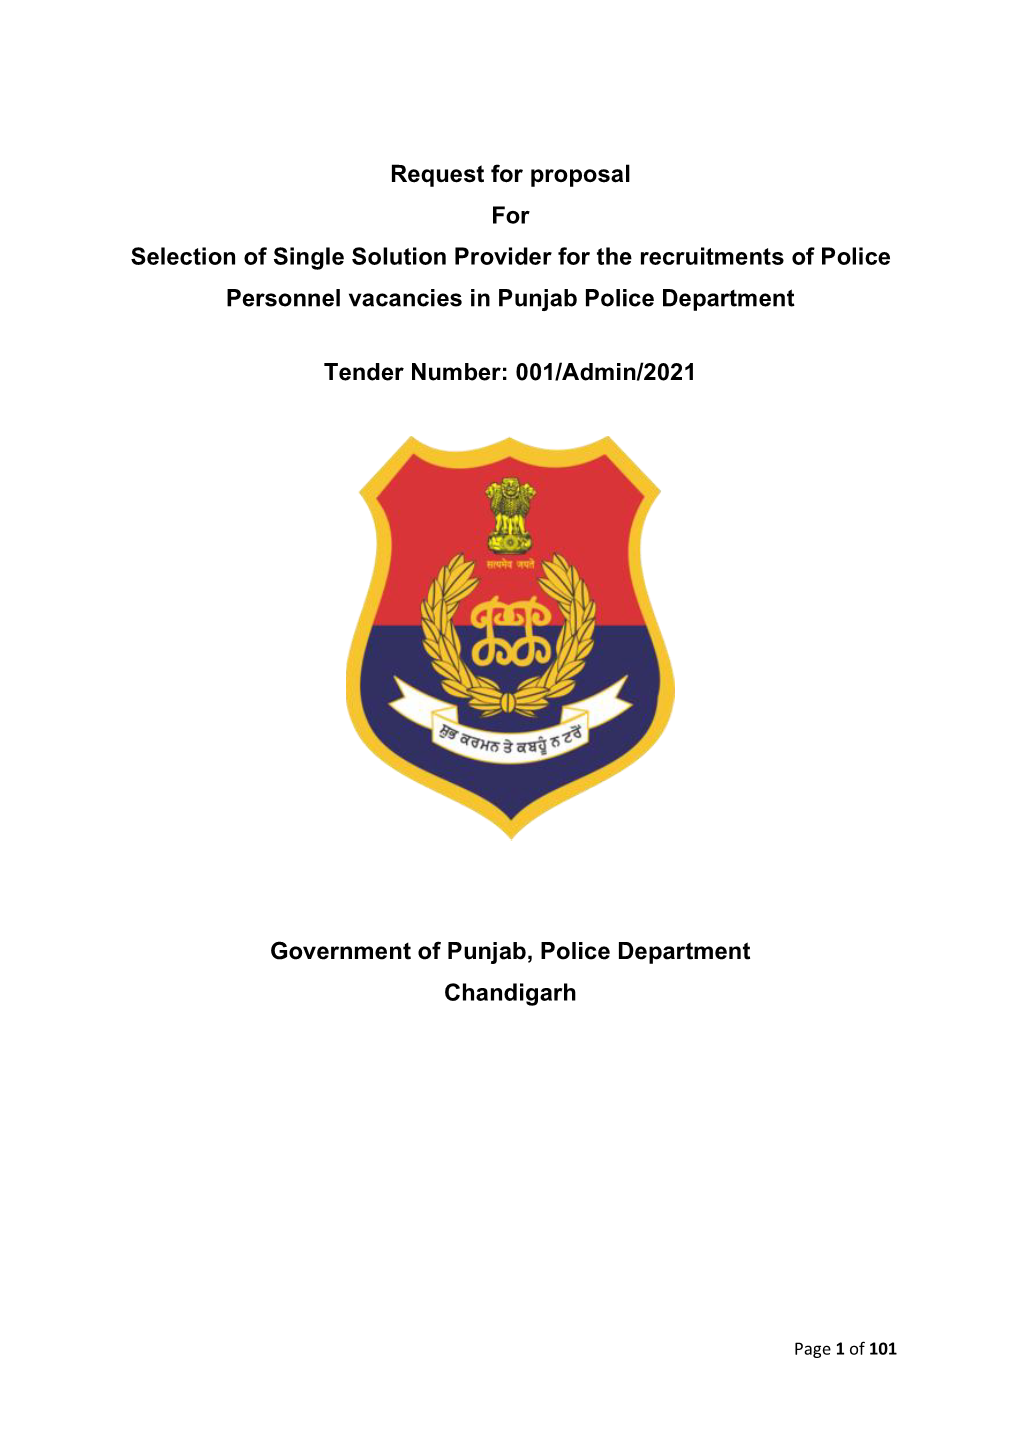 Selection of Single Solution Provider for the Recruitments of Police